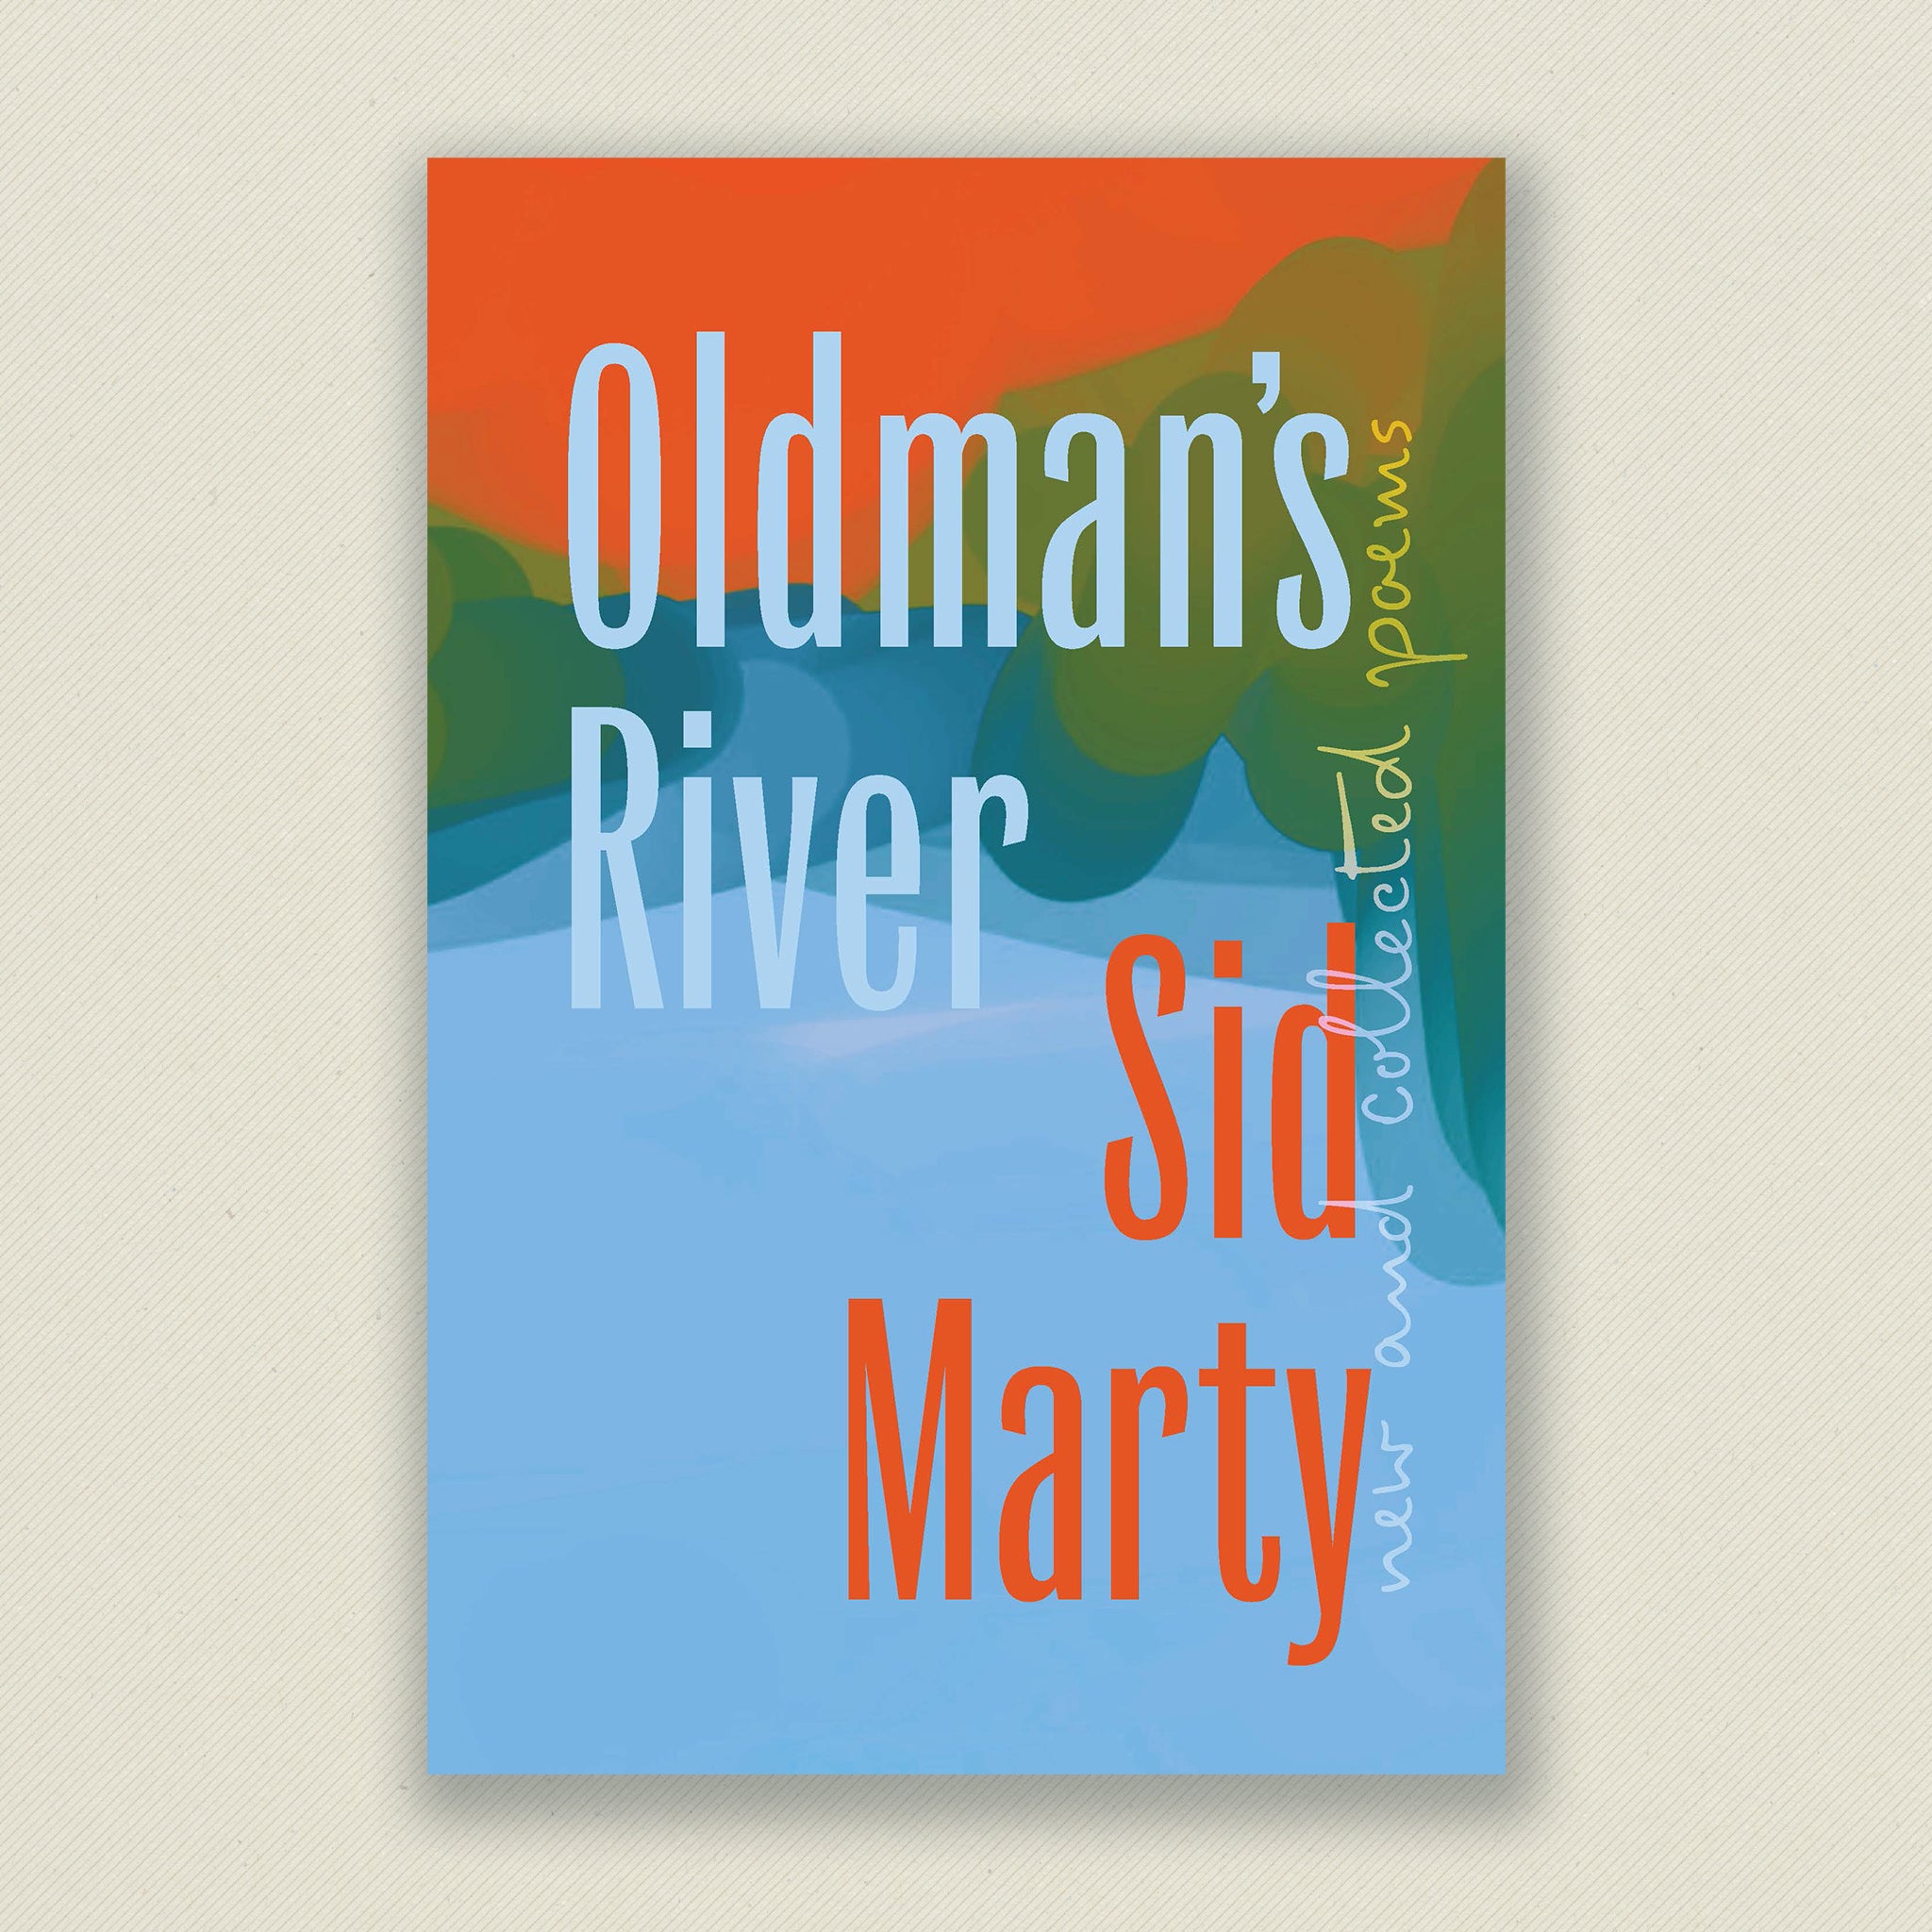 Oldman’s River: New and Collected Poems